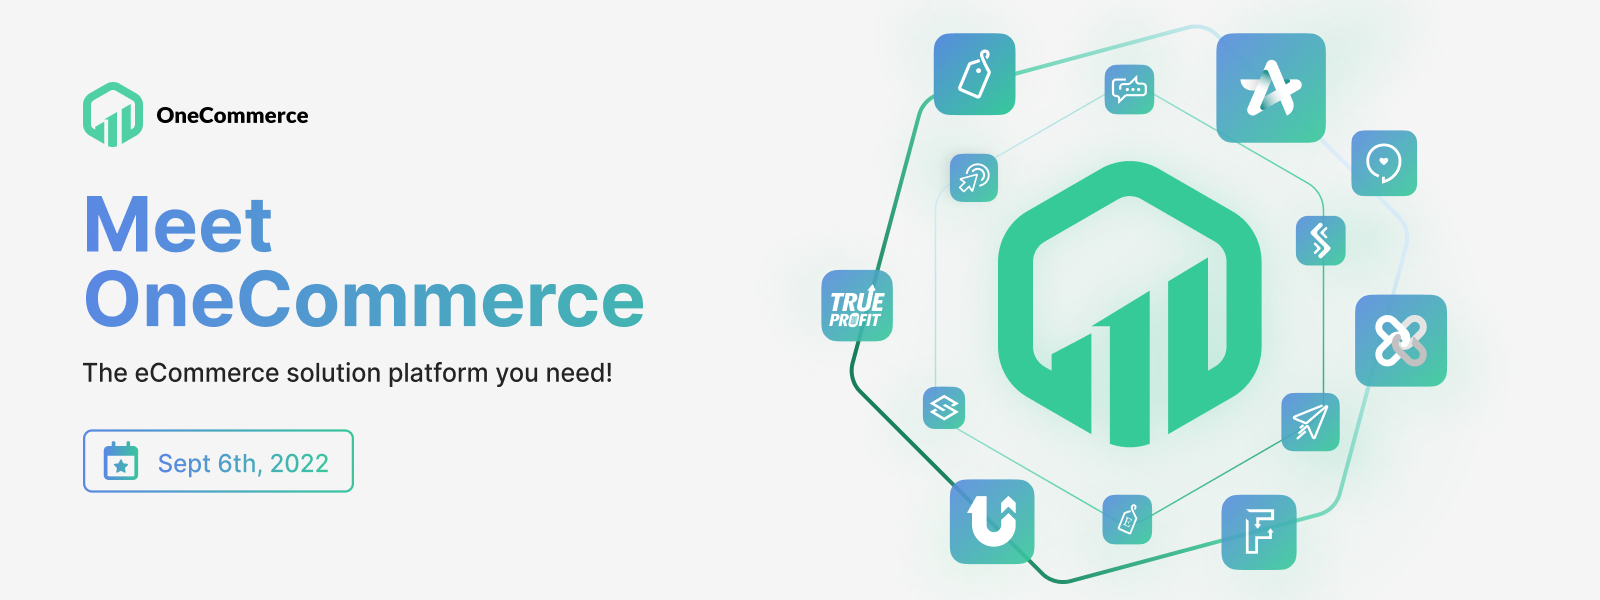 Meet OneCommerce – The E-commerce Solution Platform You Need 